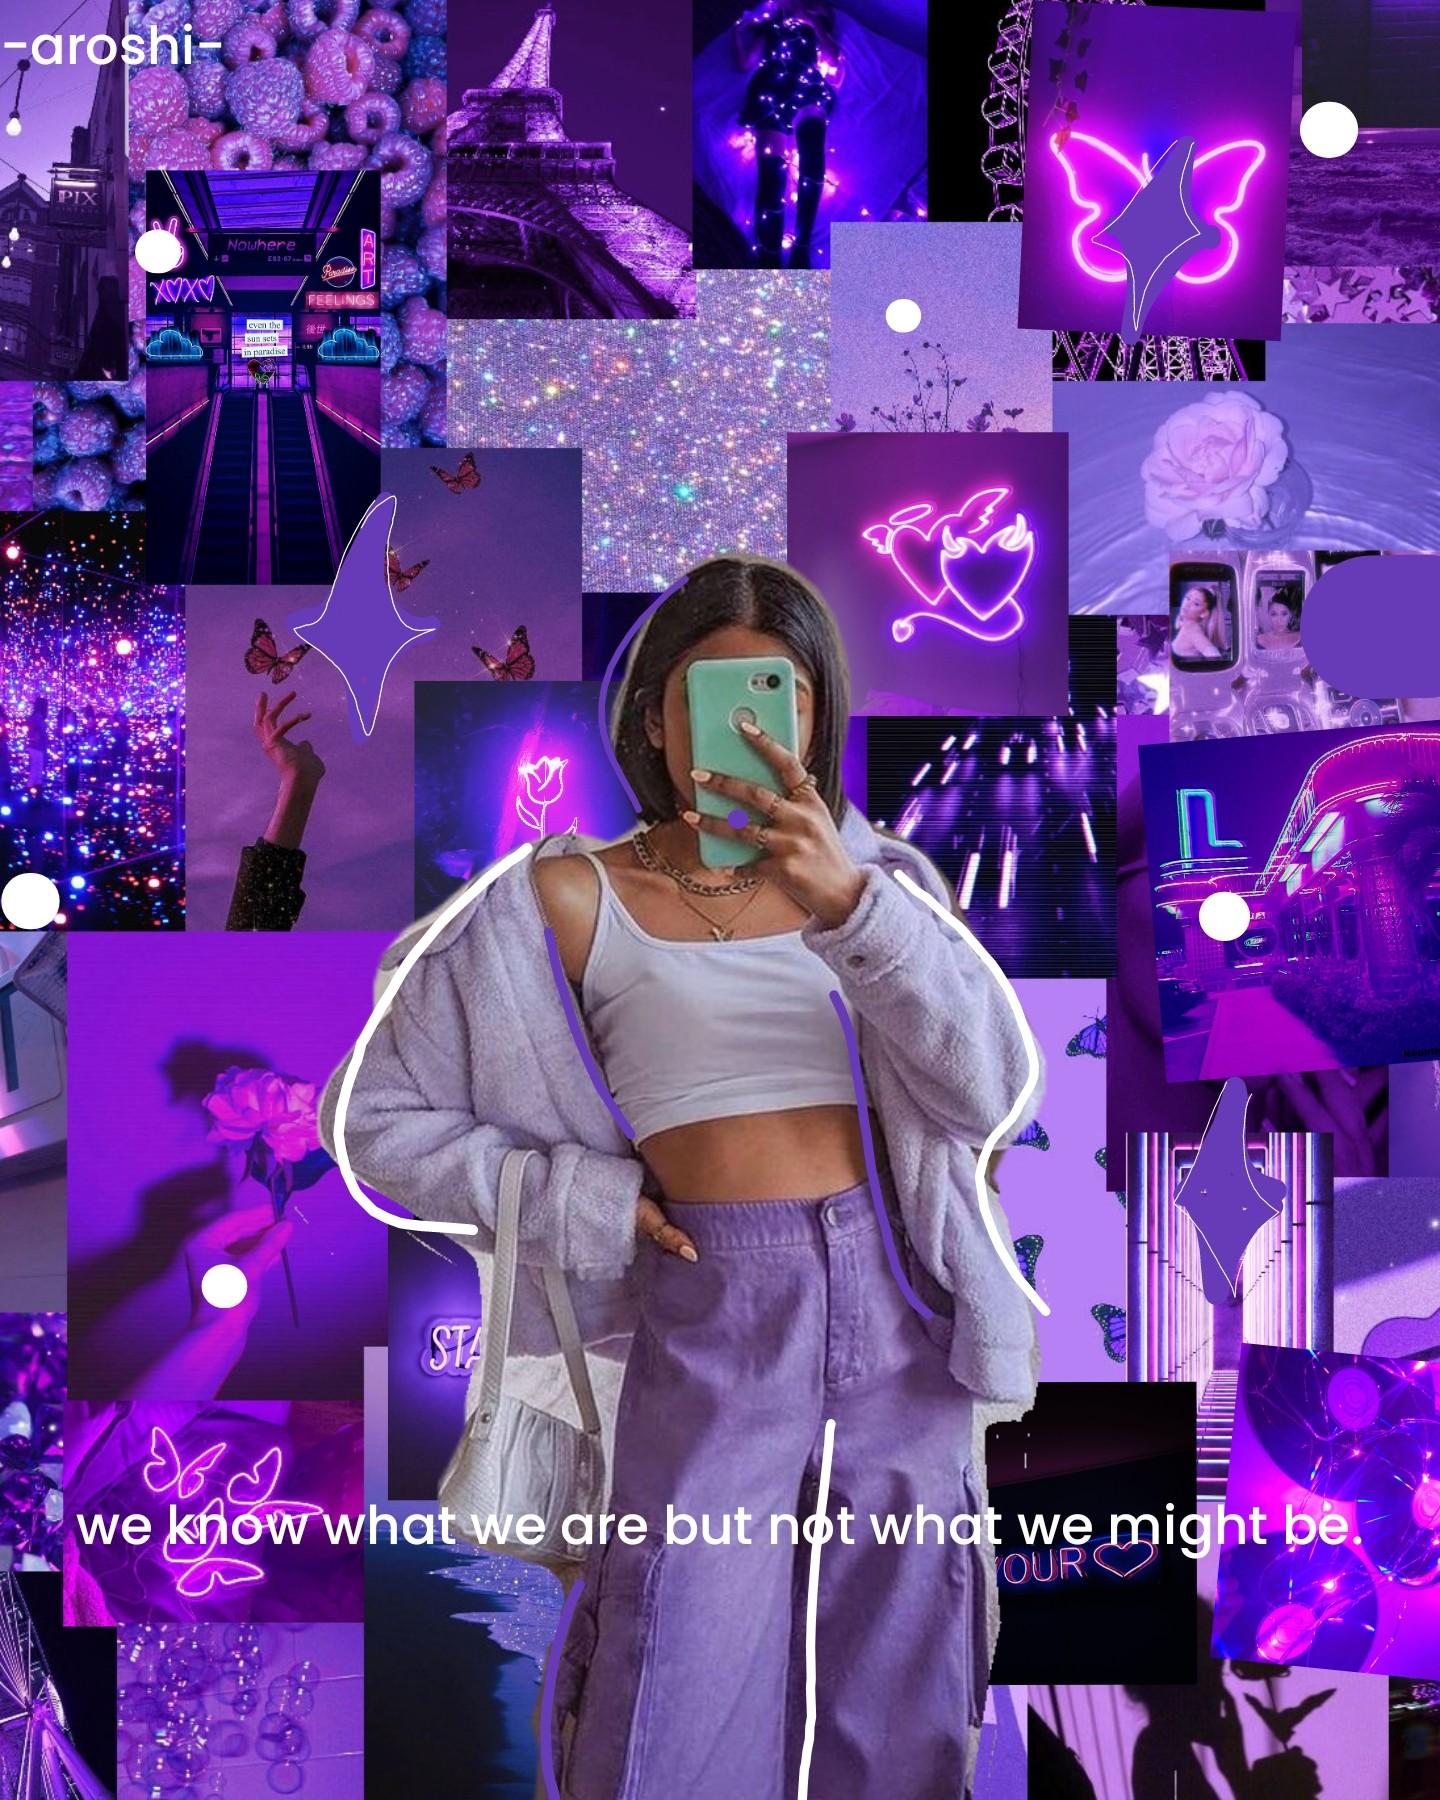 💜 April 9 23 💜
figured out that I'd do a series to keep me motivated to post. I really like this minimal style so here is collage #1 from the minimal series!!